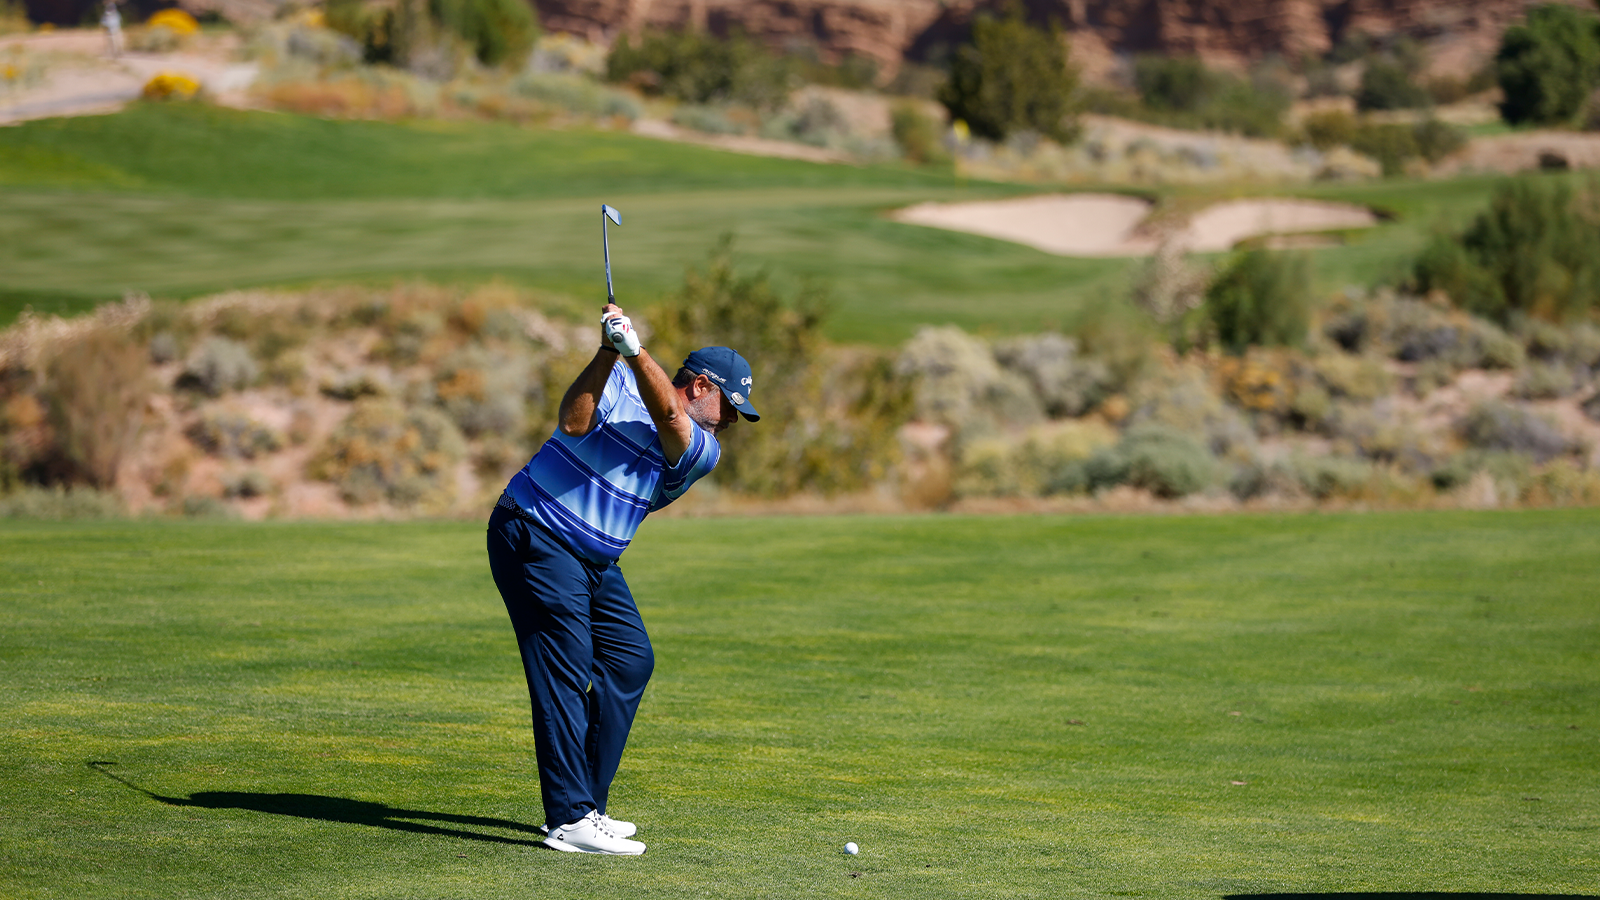 David Hronek hits his shot on the 10th hole during the second round of the 34th Senior PGA Professional Championship at Twin Warriors Golf Club on October 14, 2022 in Santa Ana Pueblo, New Mexico. (Photo by Justin Edmonds/PGA of America)